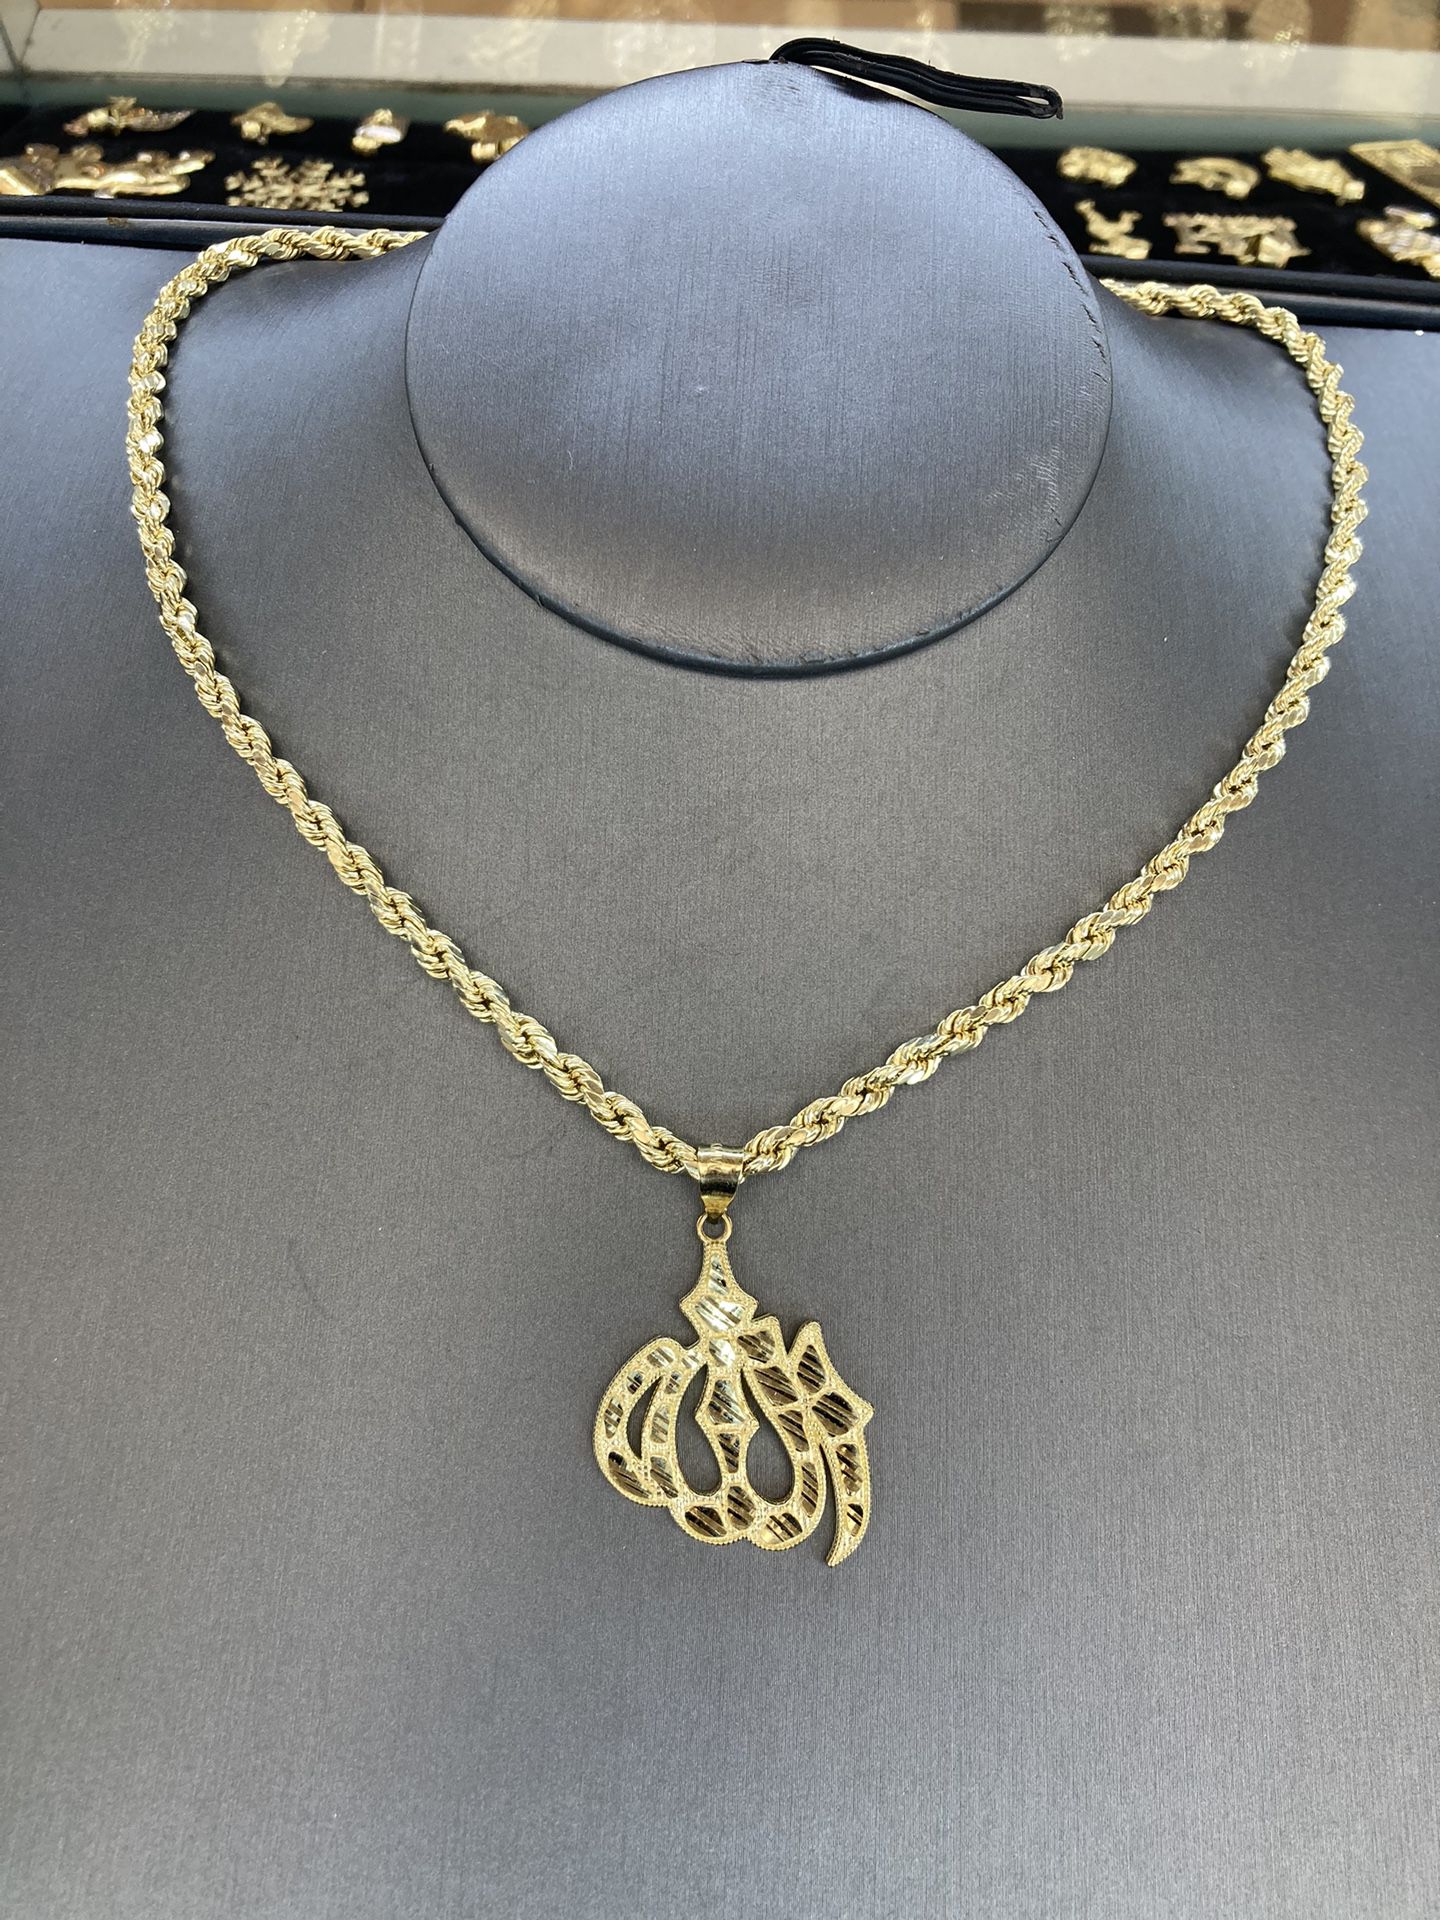 10kt Real Gold Chain (18 Inch,04mm)10kt Real Gold Pendant 